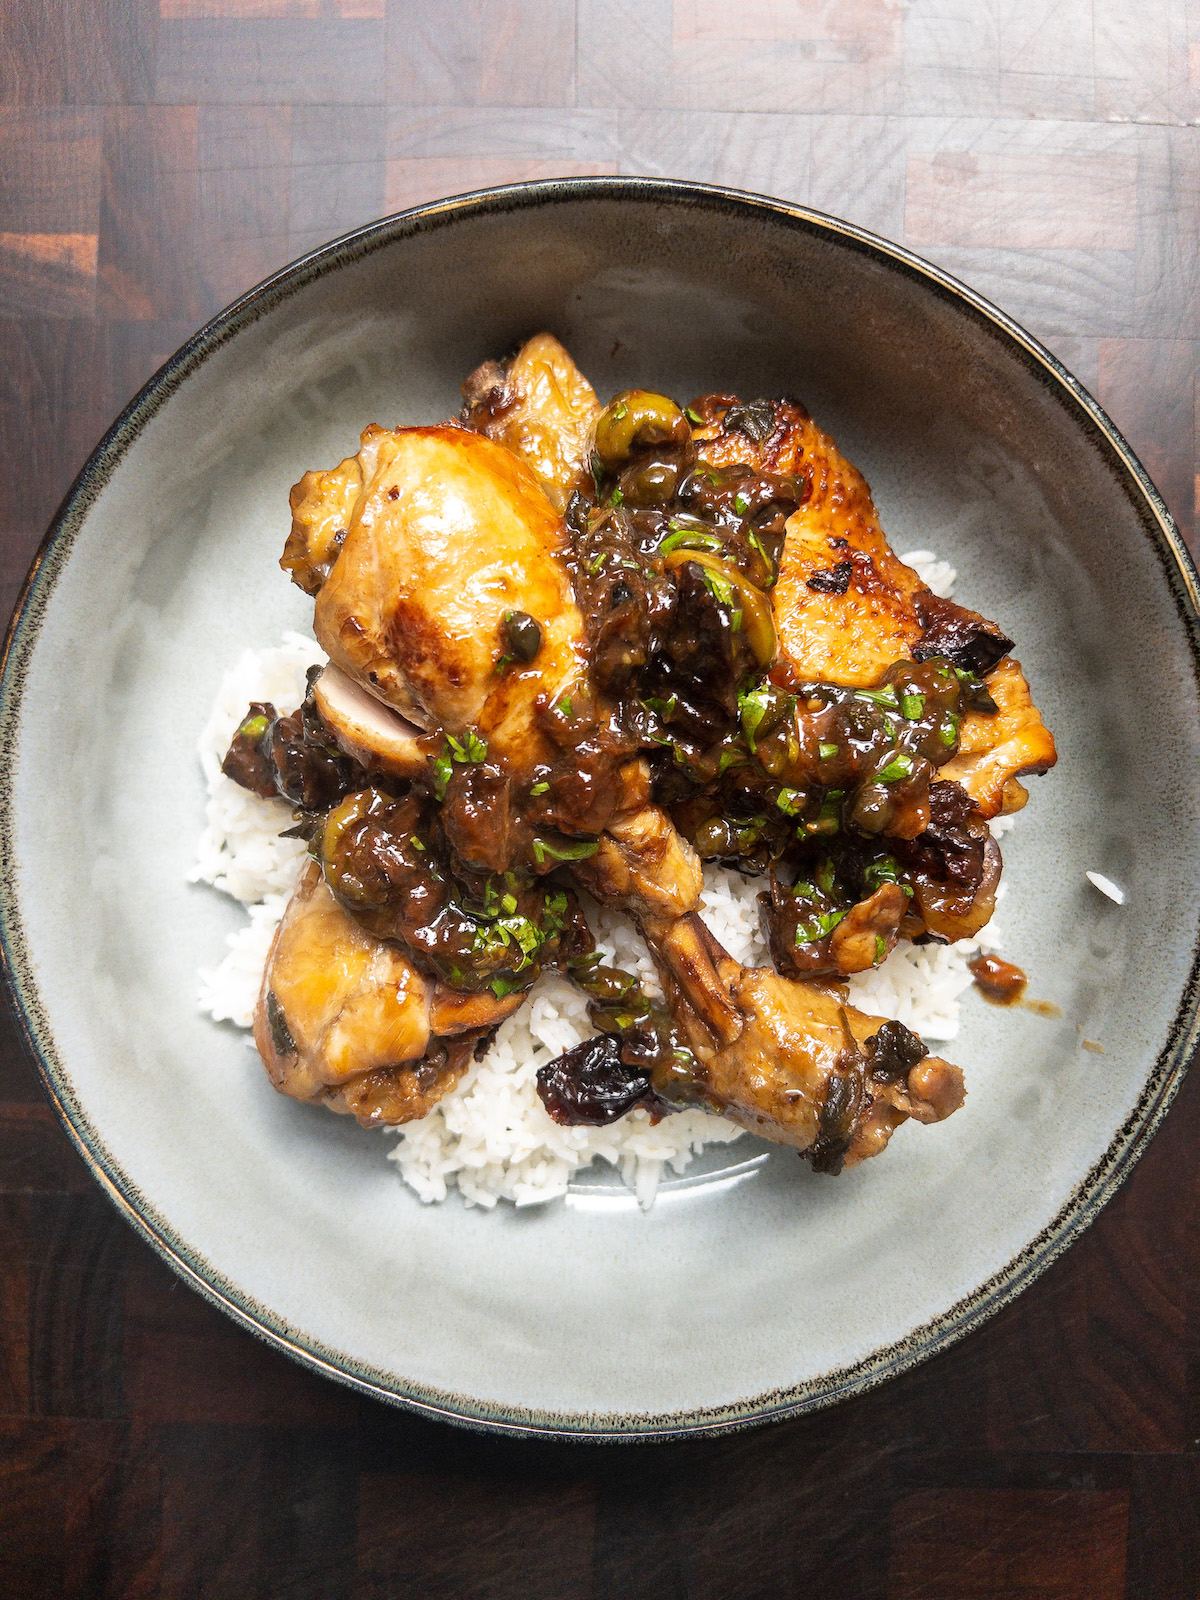 Overhead shot of Chicken Marbella and rice in a grey bowl on a dark wood background